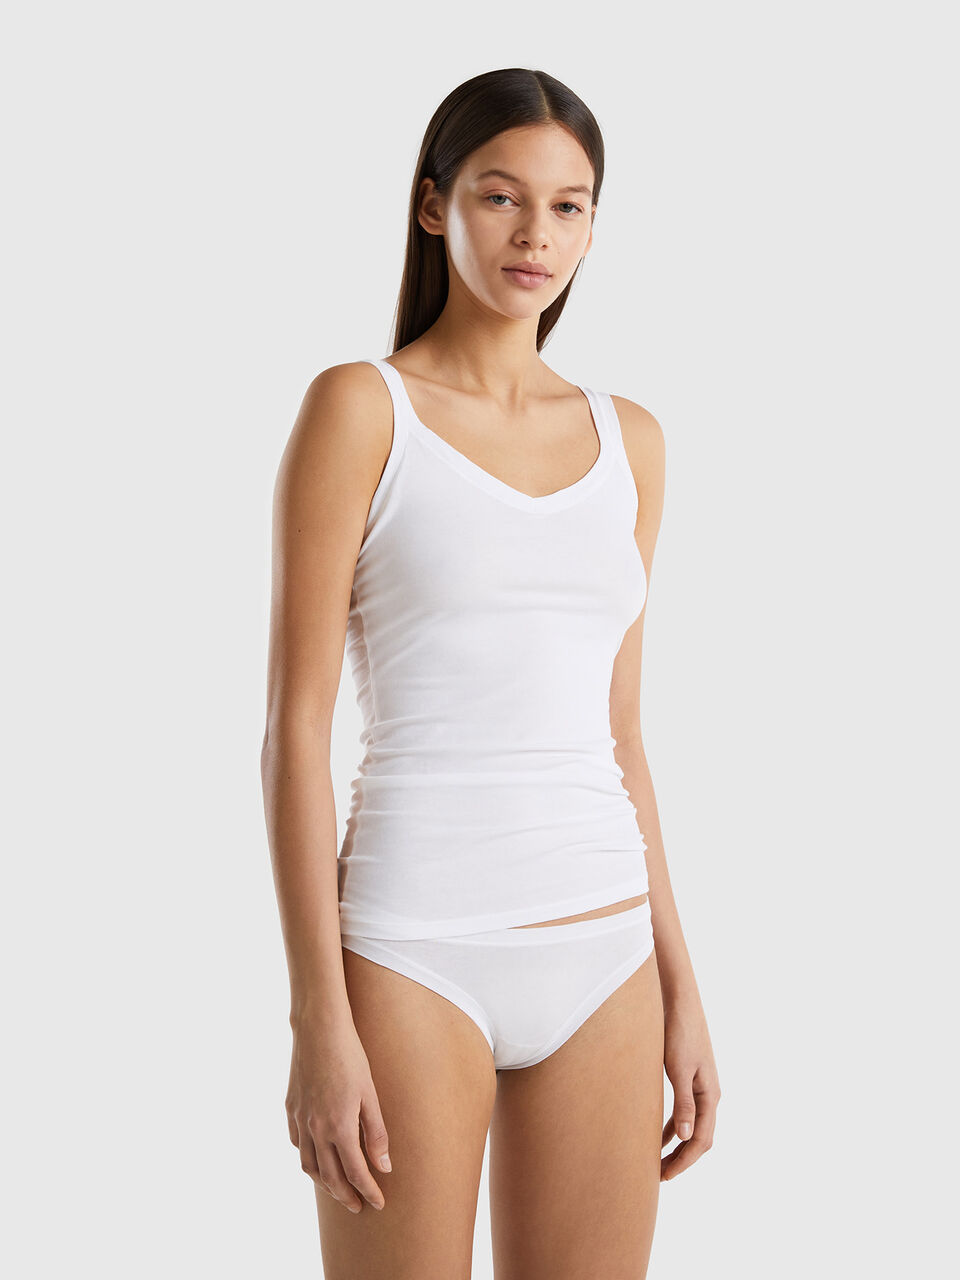 Smooth Stretch Cotton Tank Top